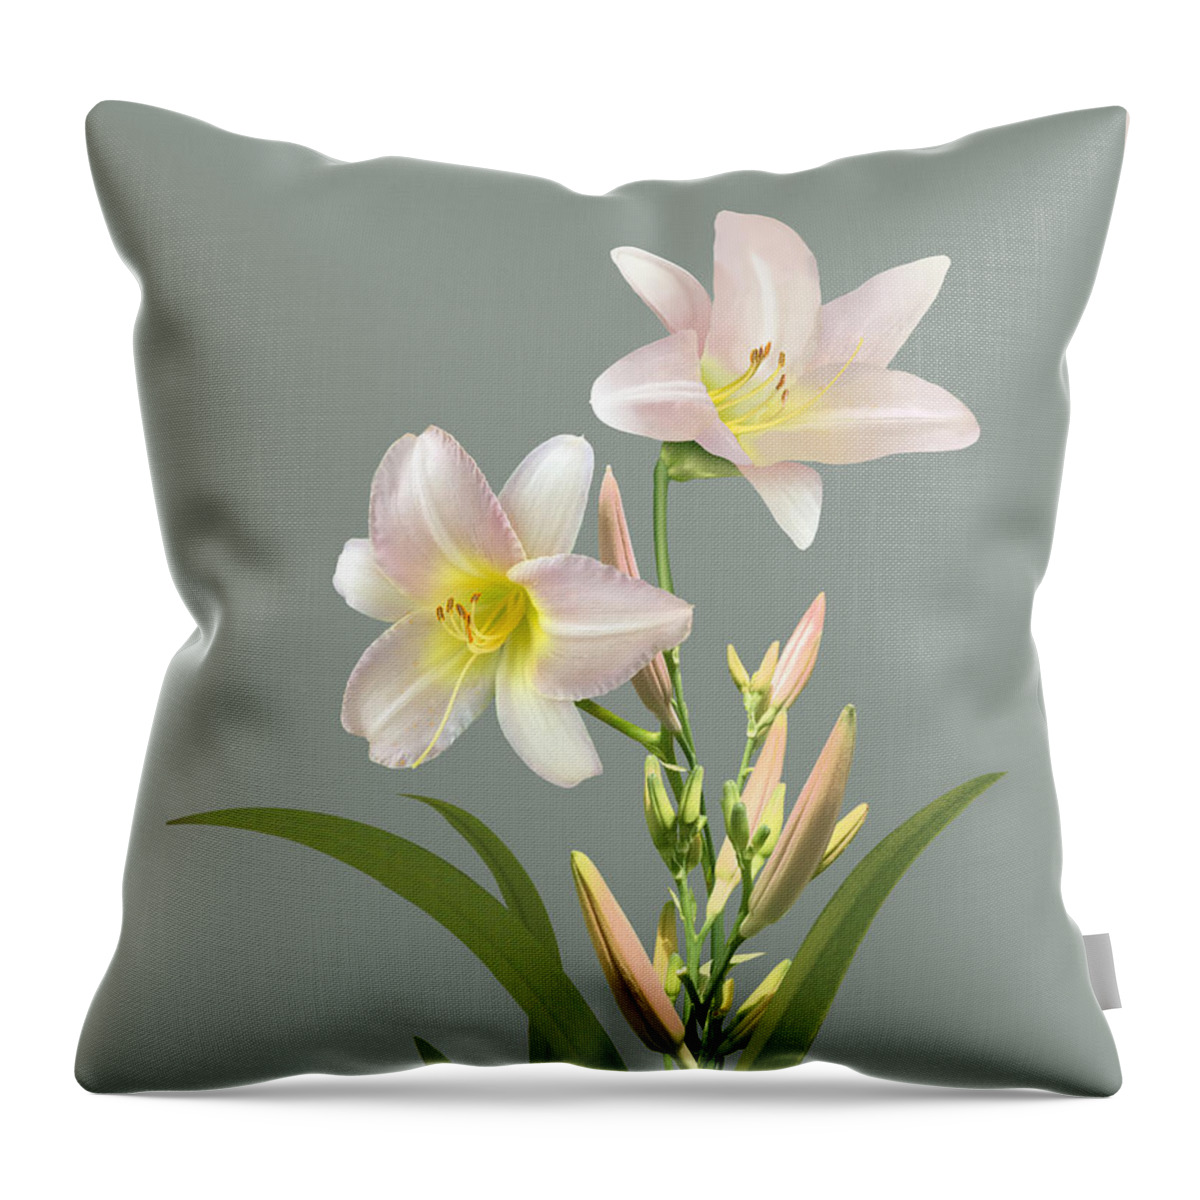 Flower Throw Pillow featuring the digital art Spade's Daylily by M Spadecaller